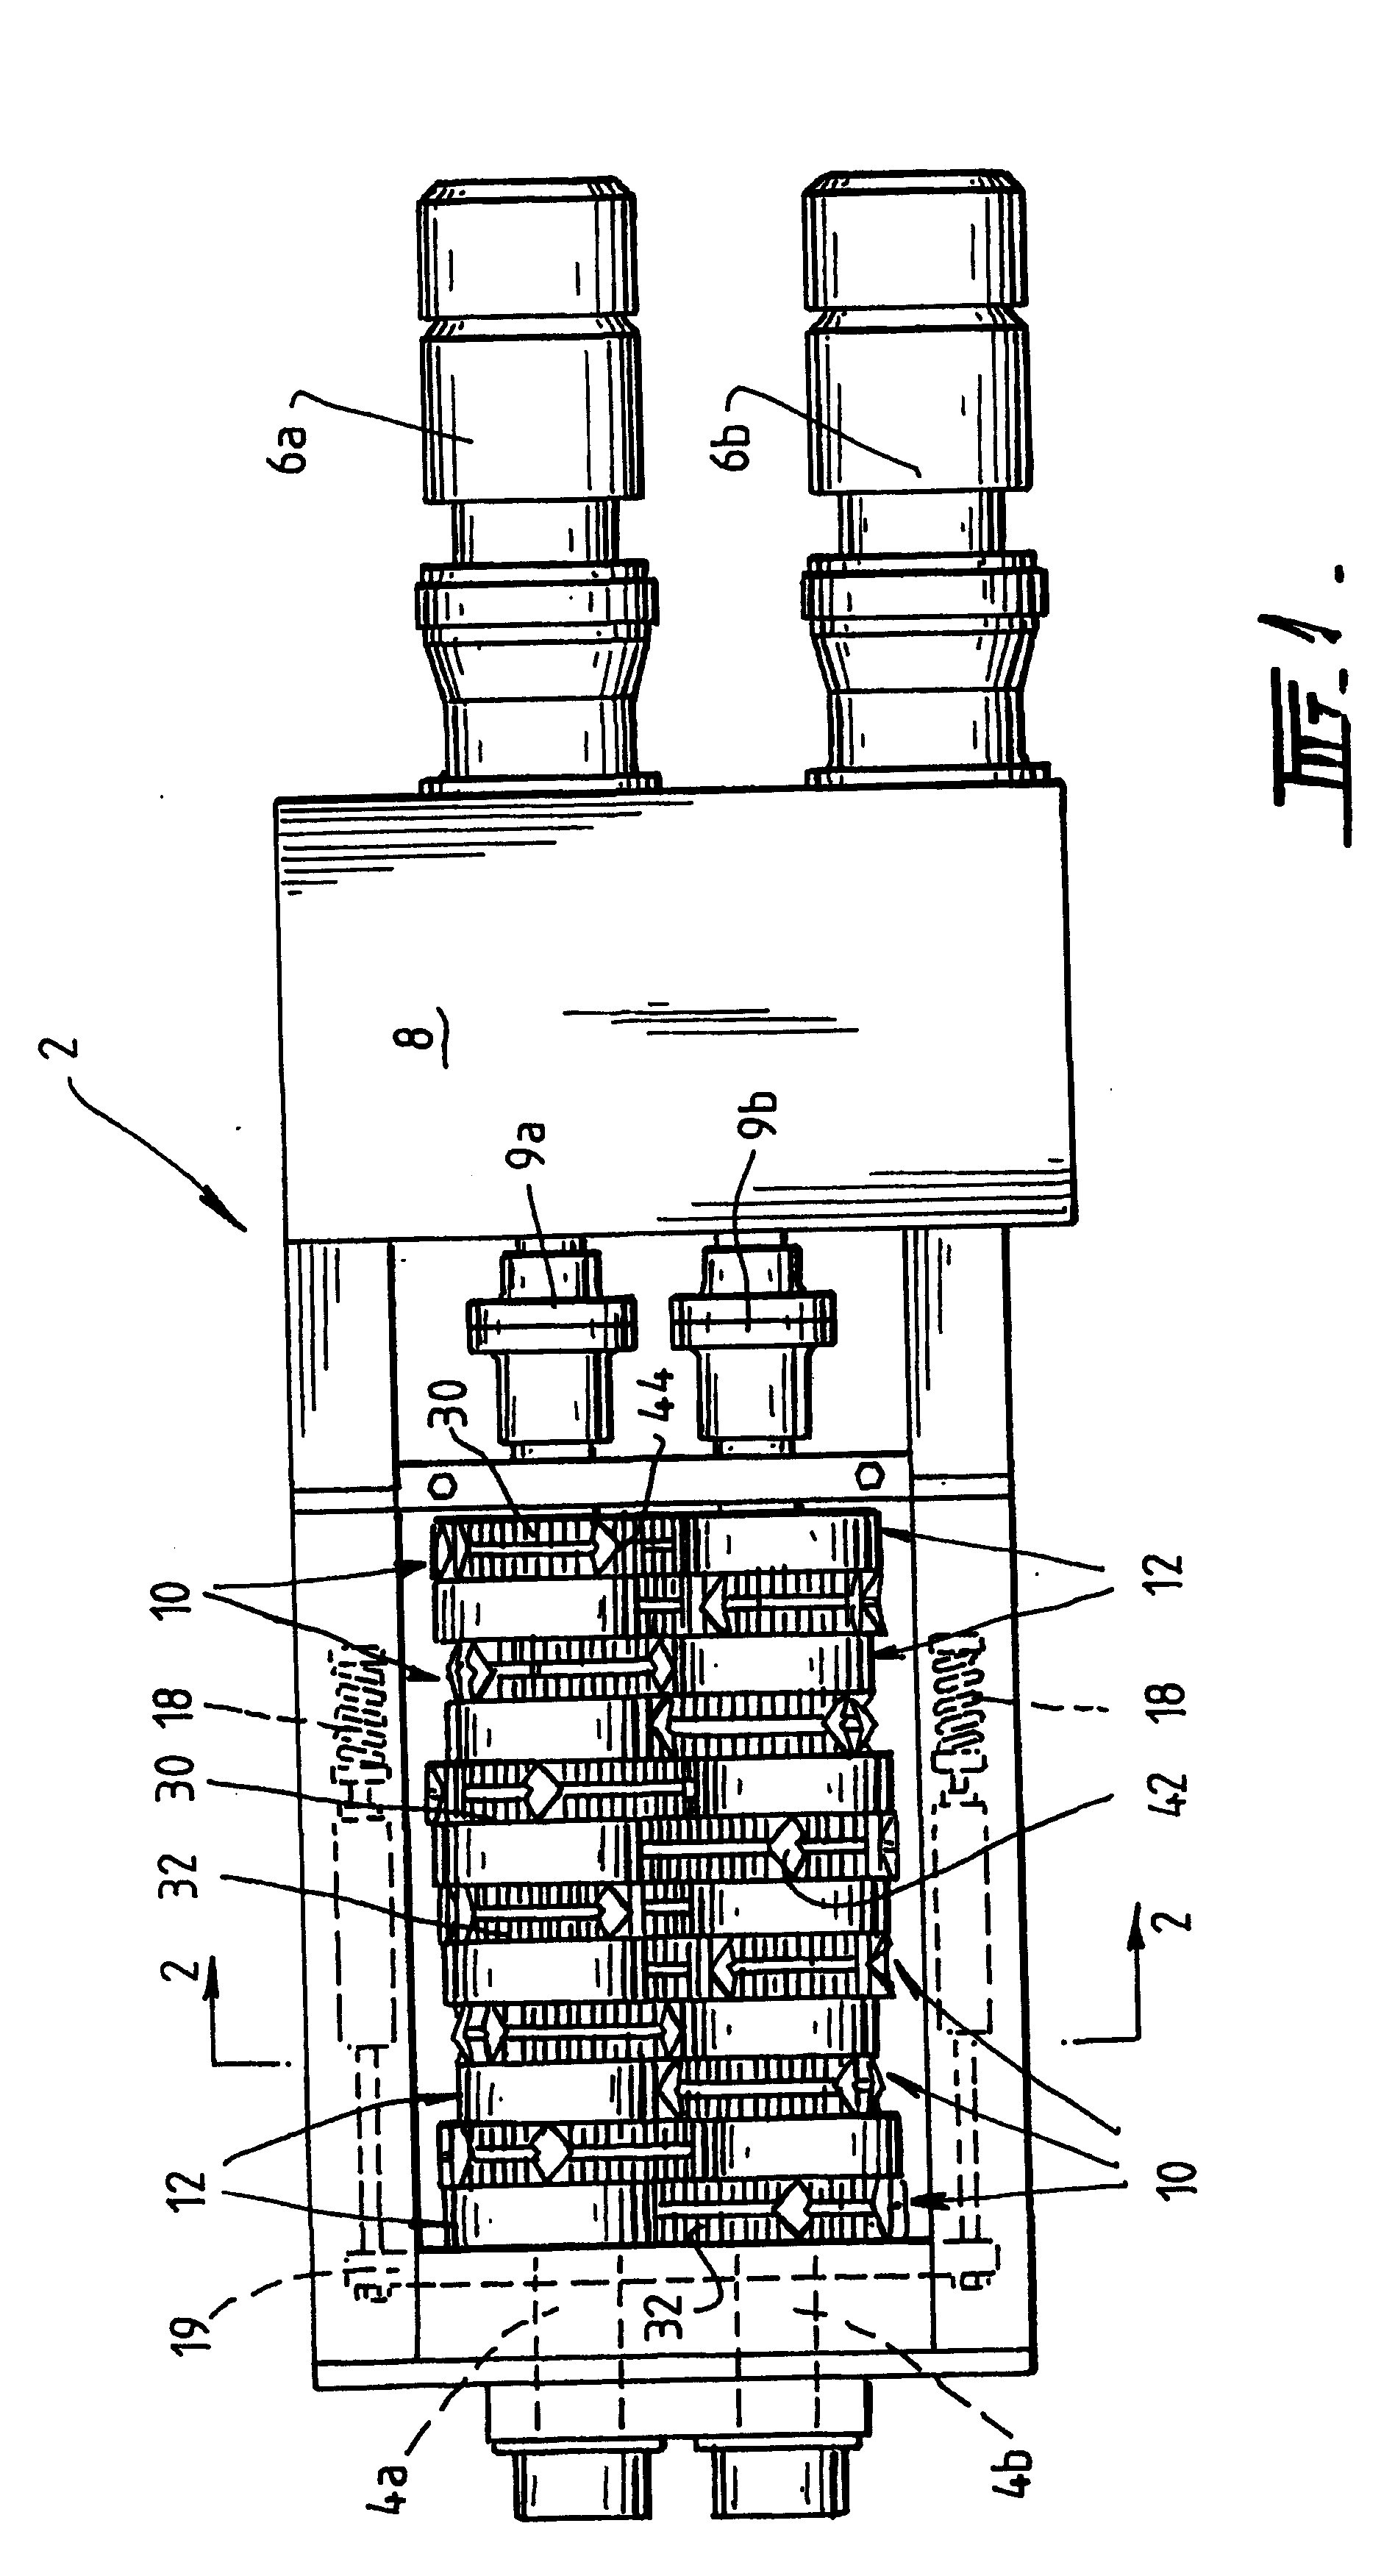 Self cleaning shredding device having movable cleaning rings